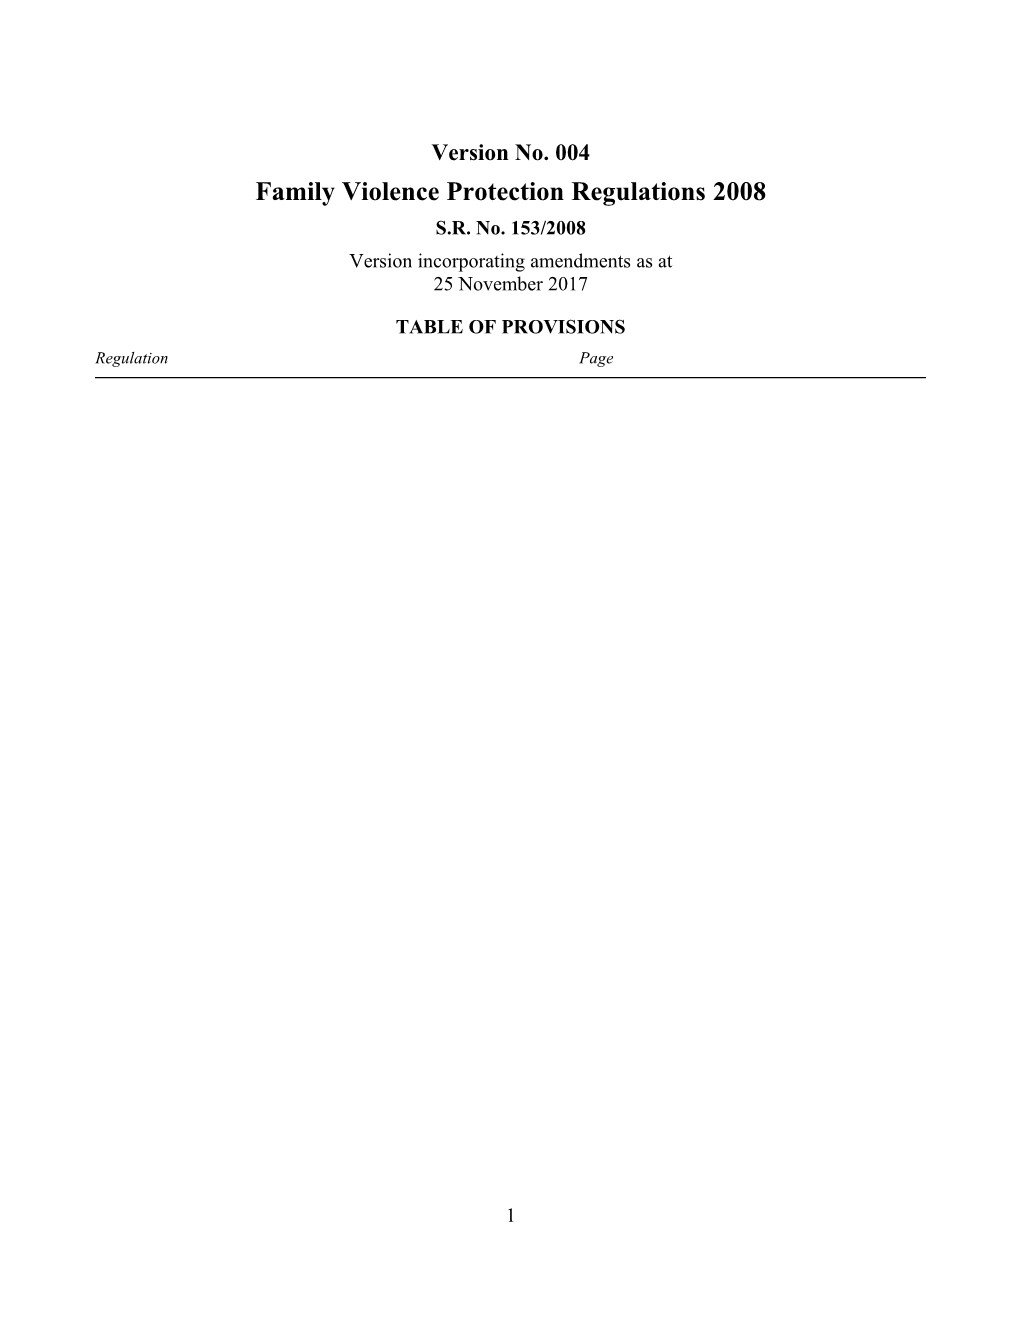 Family Violence Protection Regulations 2008